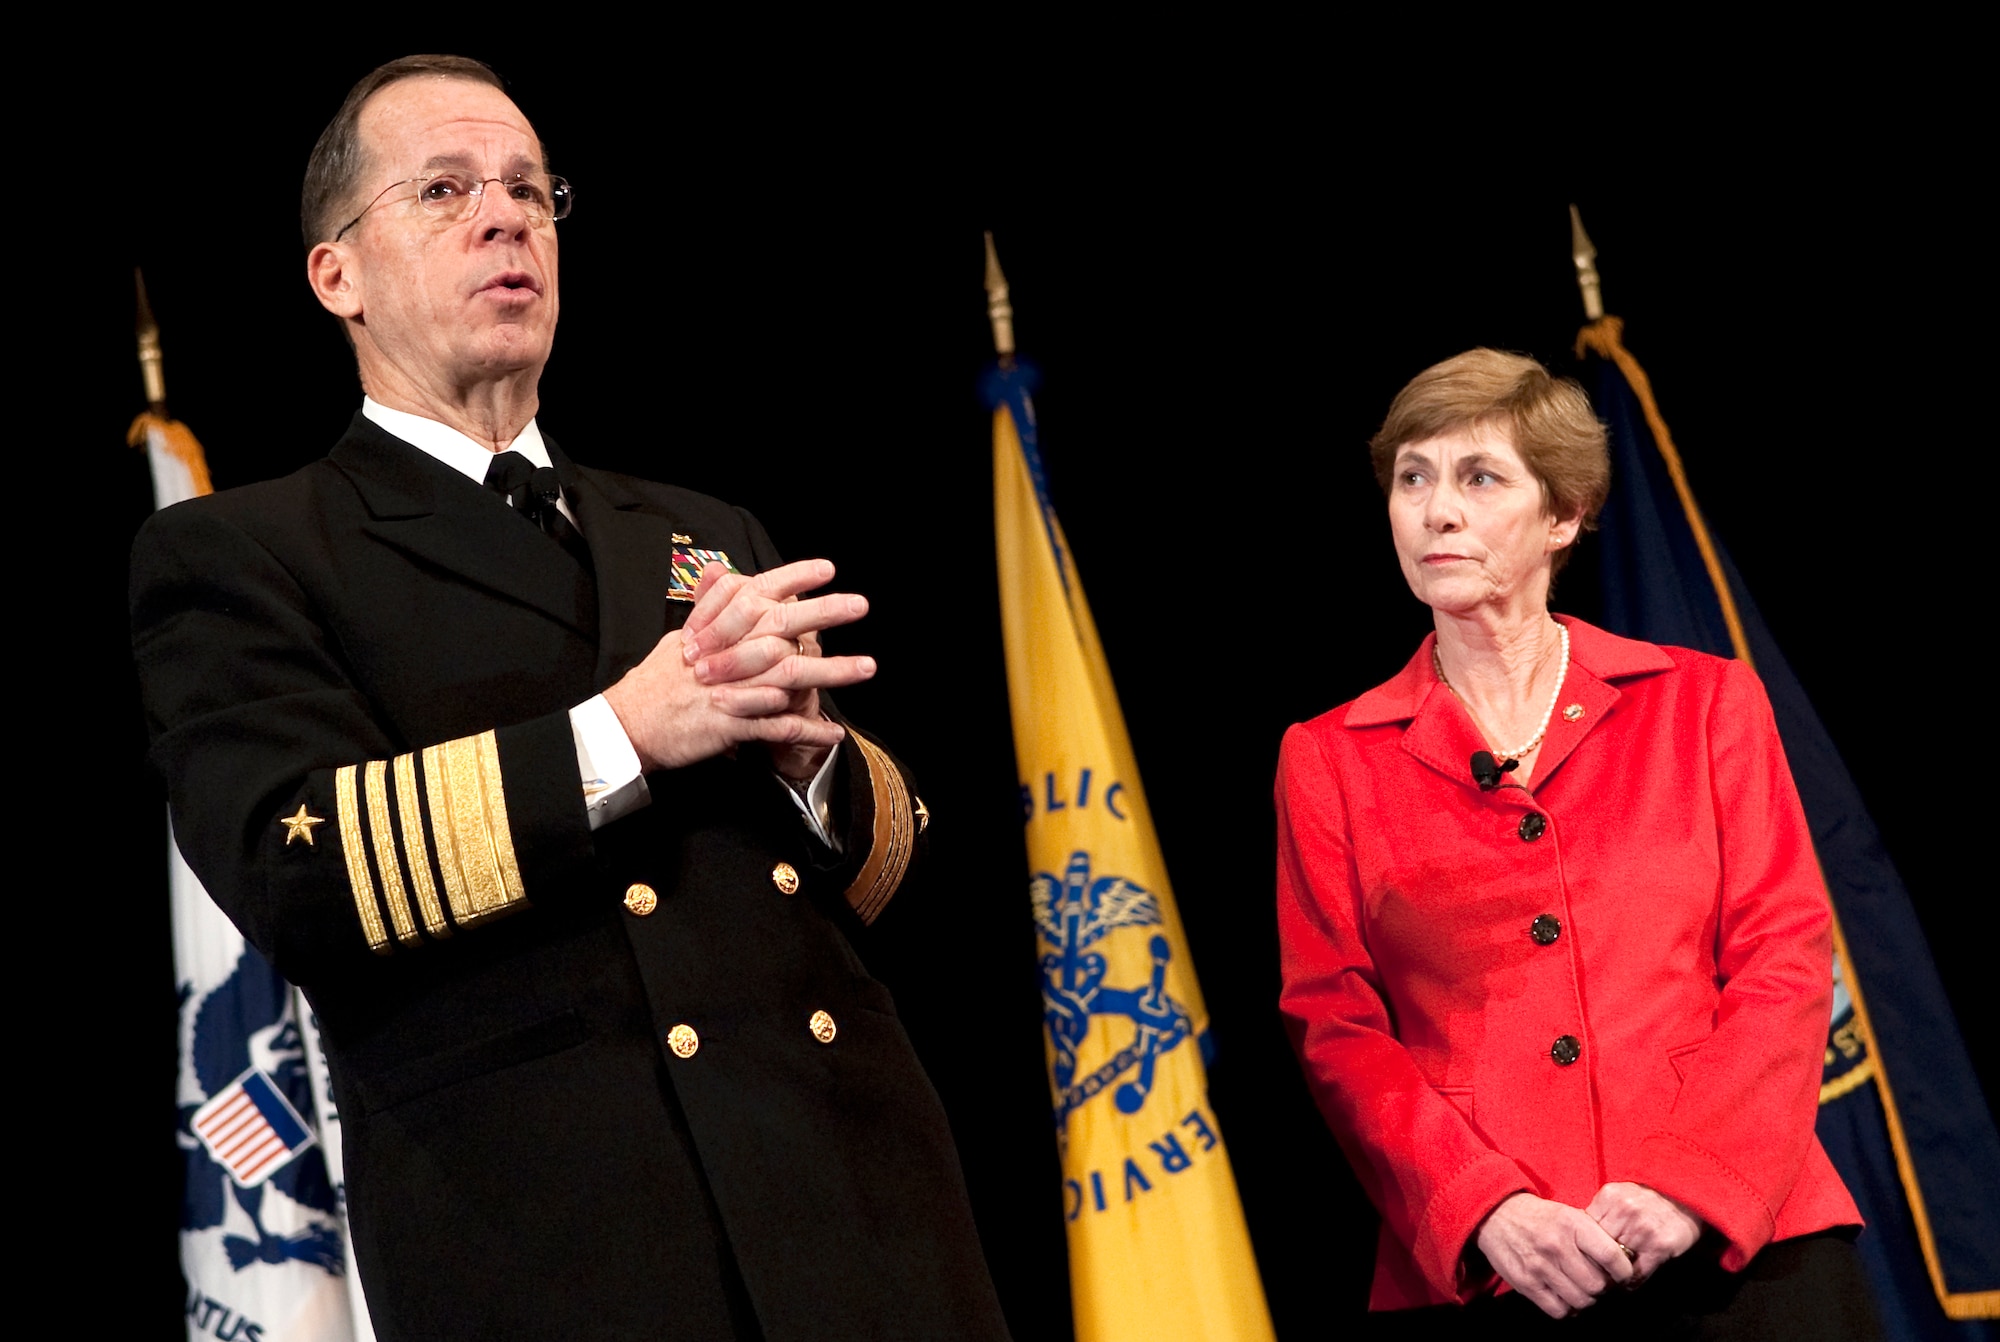 Adm. Mike Mullen, chairman of the Joint Chiefs of Staff, and his wife, Deborah, address the audience Jan. 13, 2010, at the 2nd Annual Suicide Prevention Conference sponsored by the Defense and Veterans Affairs departments in Washington, D.C. (Defense Department photo/Petty Officer 1st Class Chad J. McNeeley)